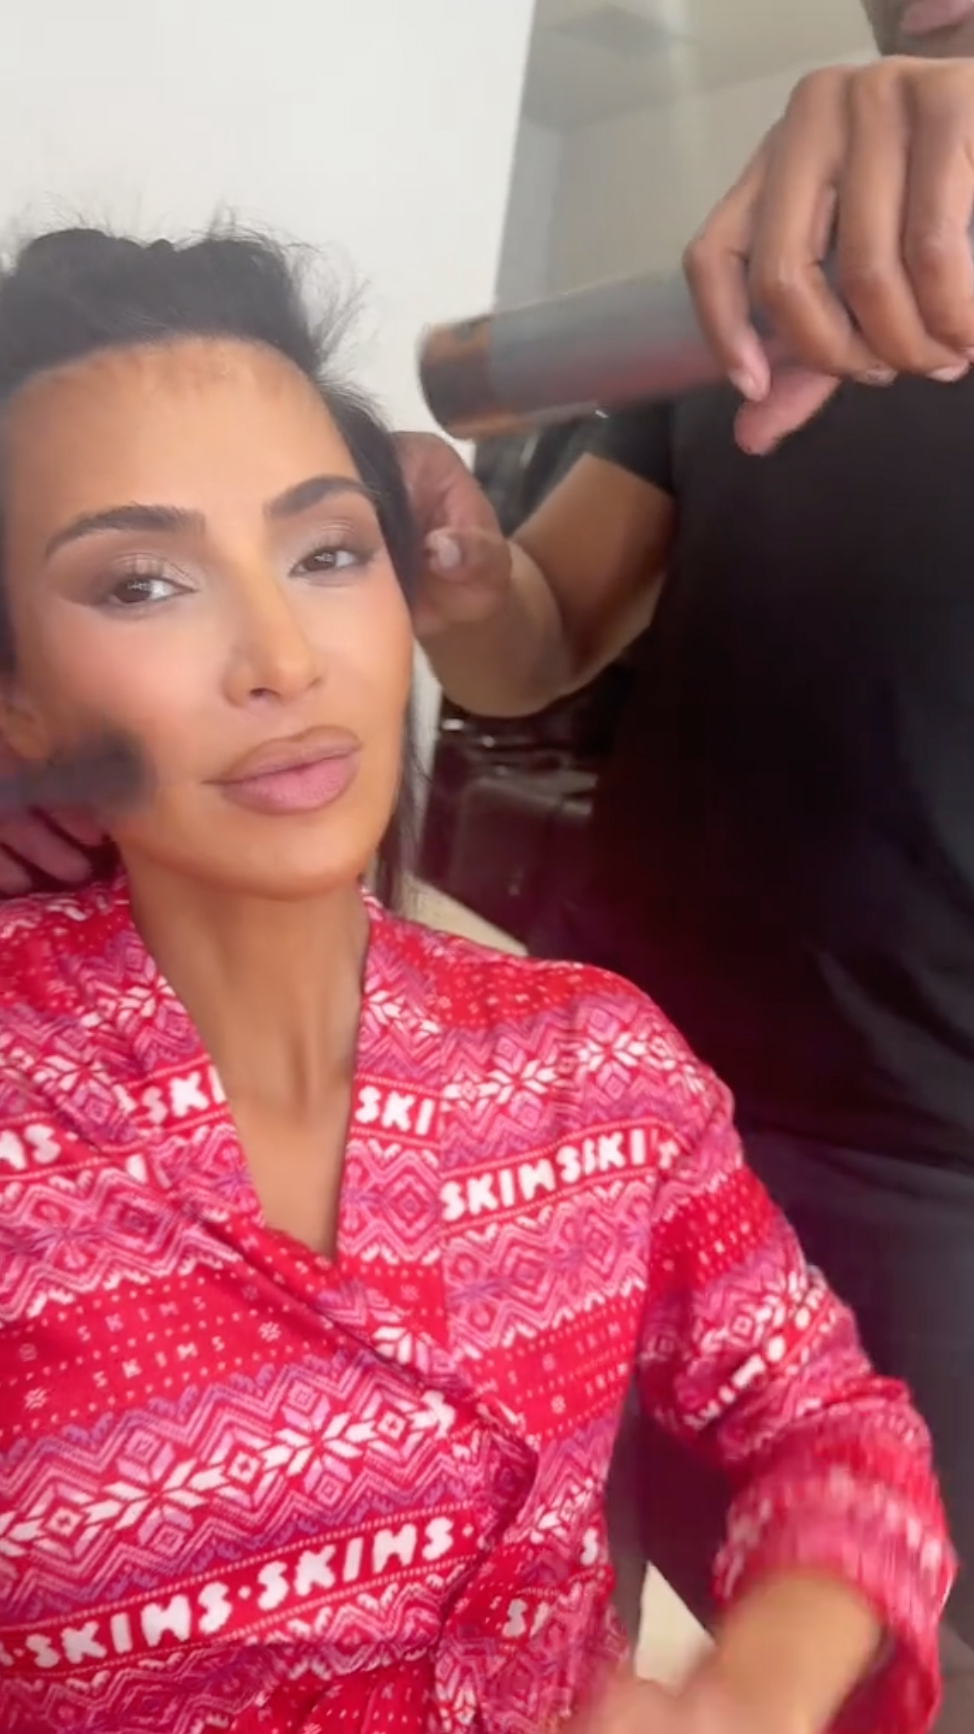 Fans were given a glimpse at Kim's real skin and hair without wigs or extensions